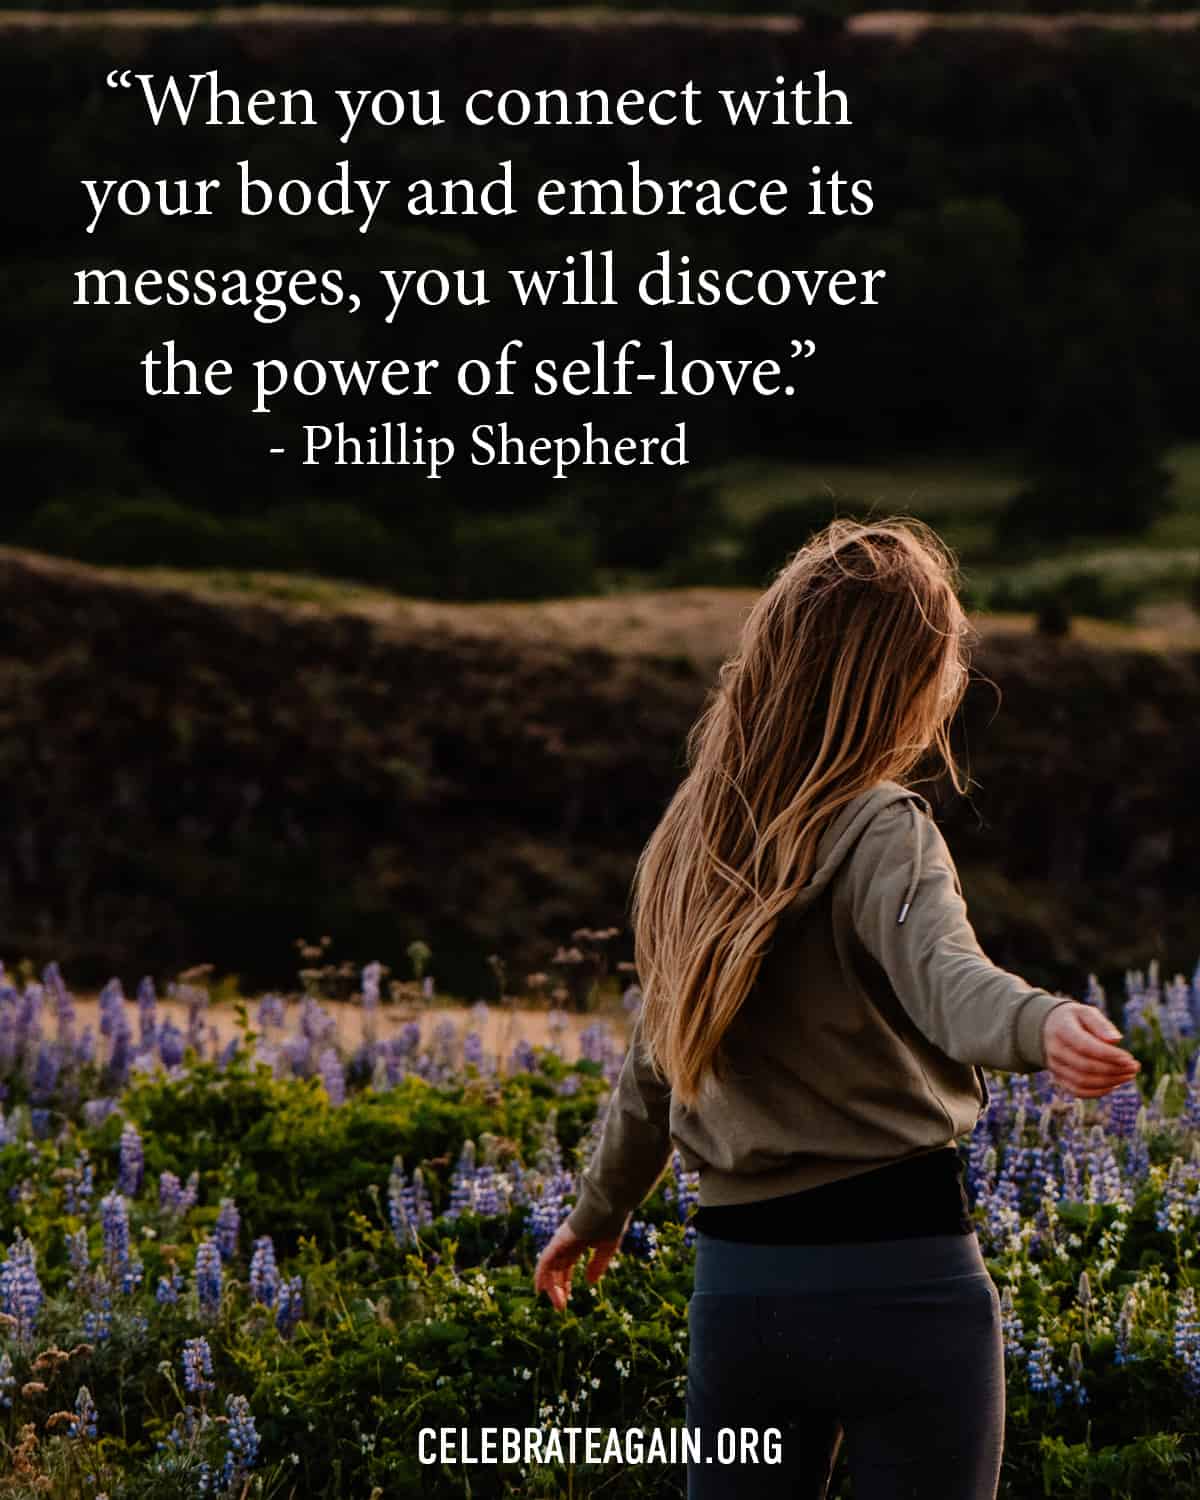 a self love quote for healing and growth saying "When you connect with your body and embrace its messages, you will discover the power of self-love." - Phillip Shepherd